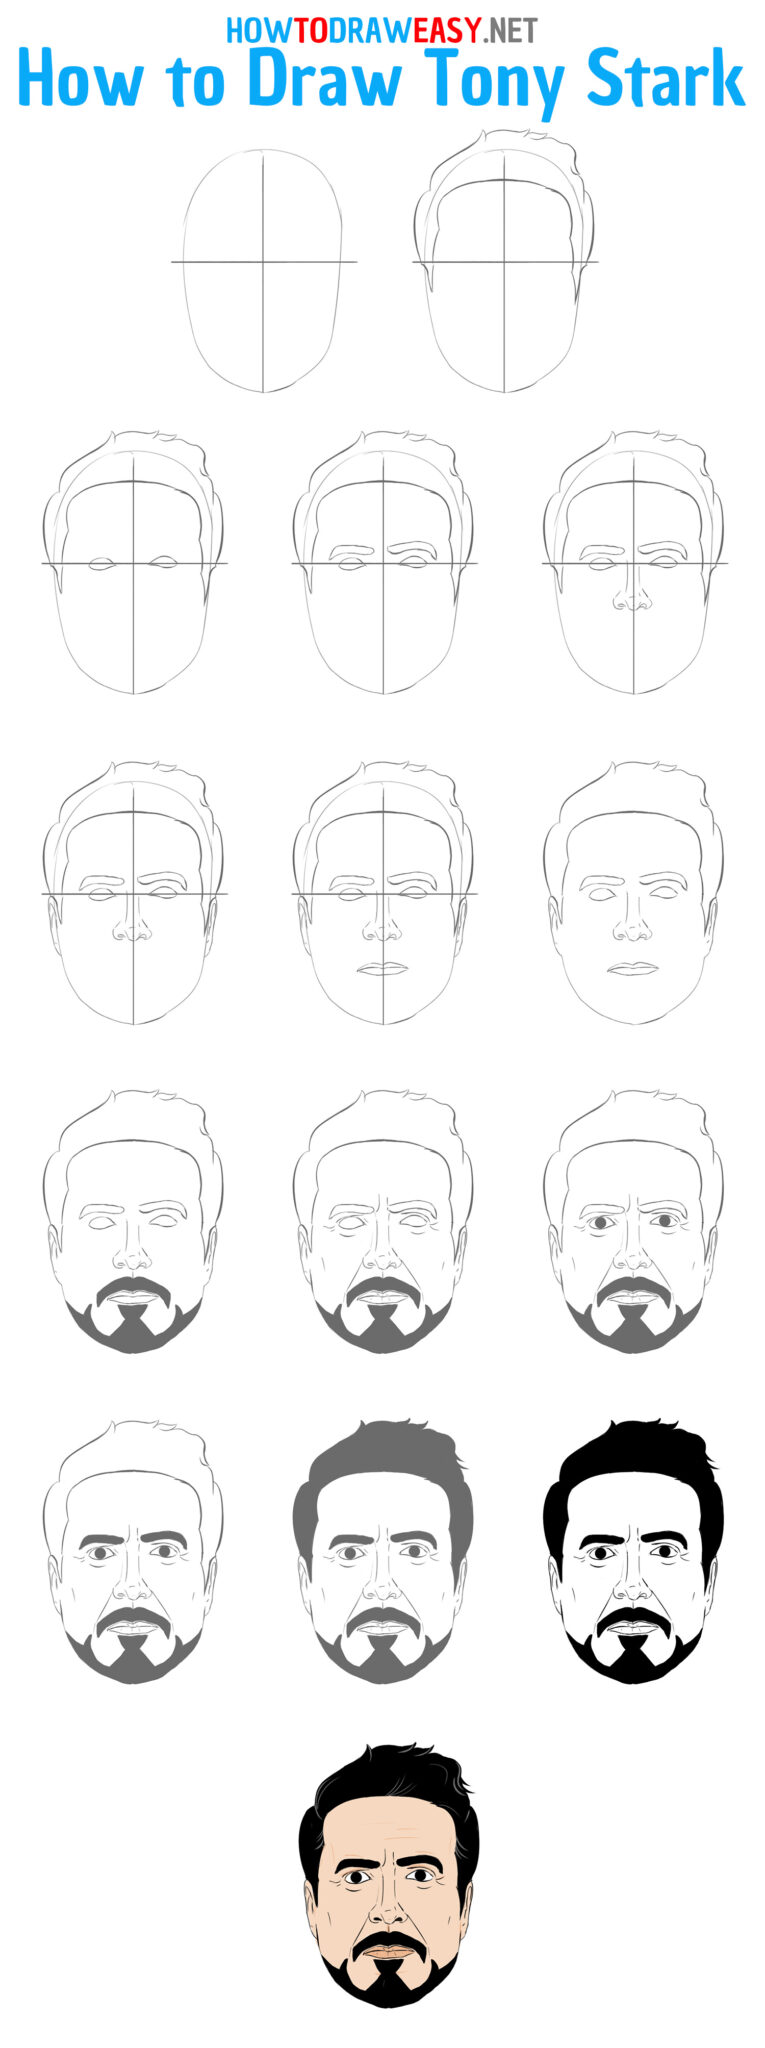 Amazing How To Draw Tony Stark Step By Step  The ultimate guide 